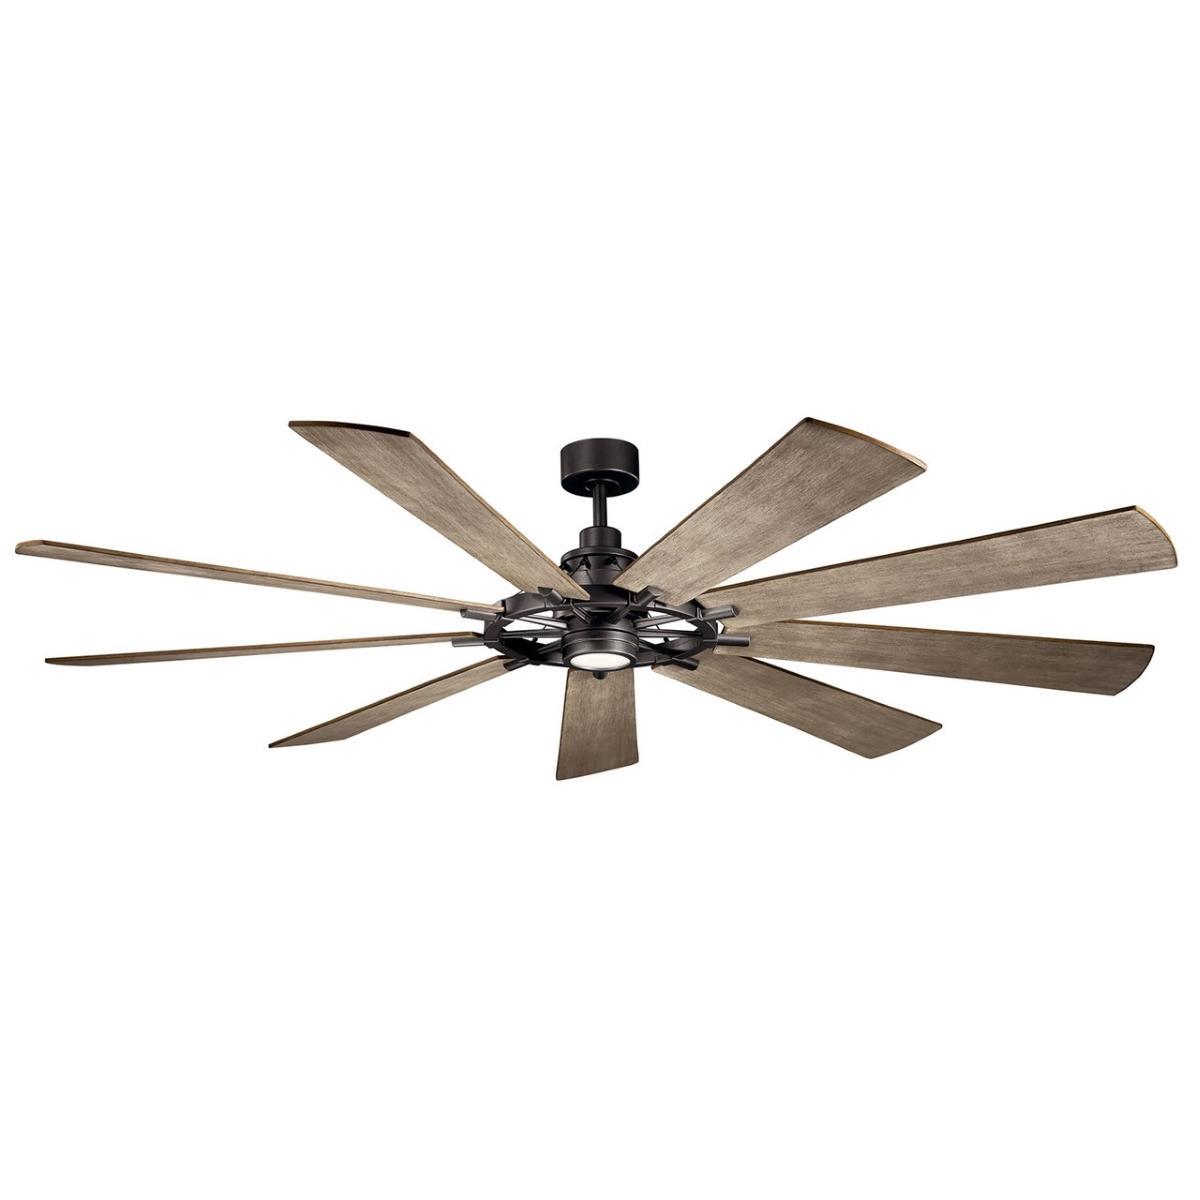 Gentry 85 Inch Farmhouse Windmill Outdoor Ceiling Fan With Light, Wall Control Included - Bees Lighting